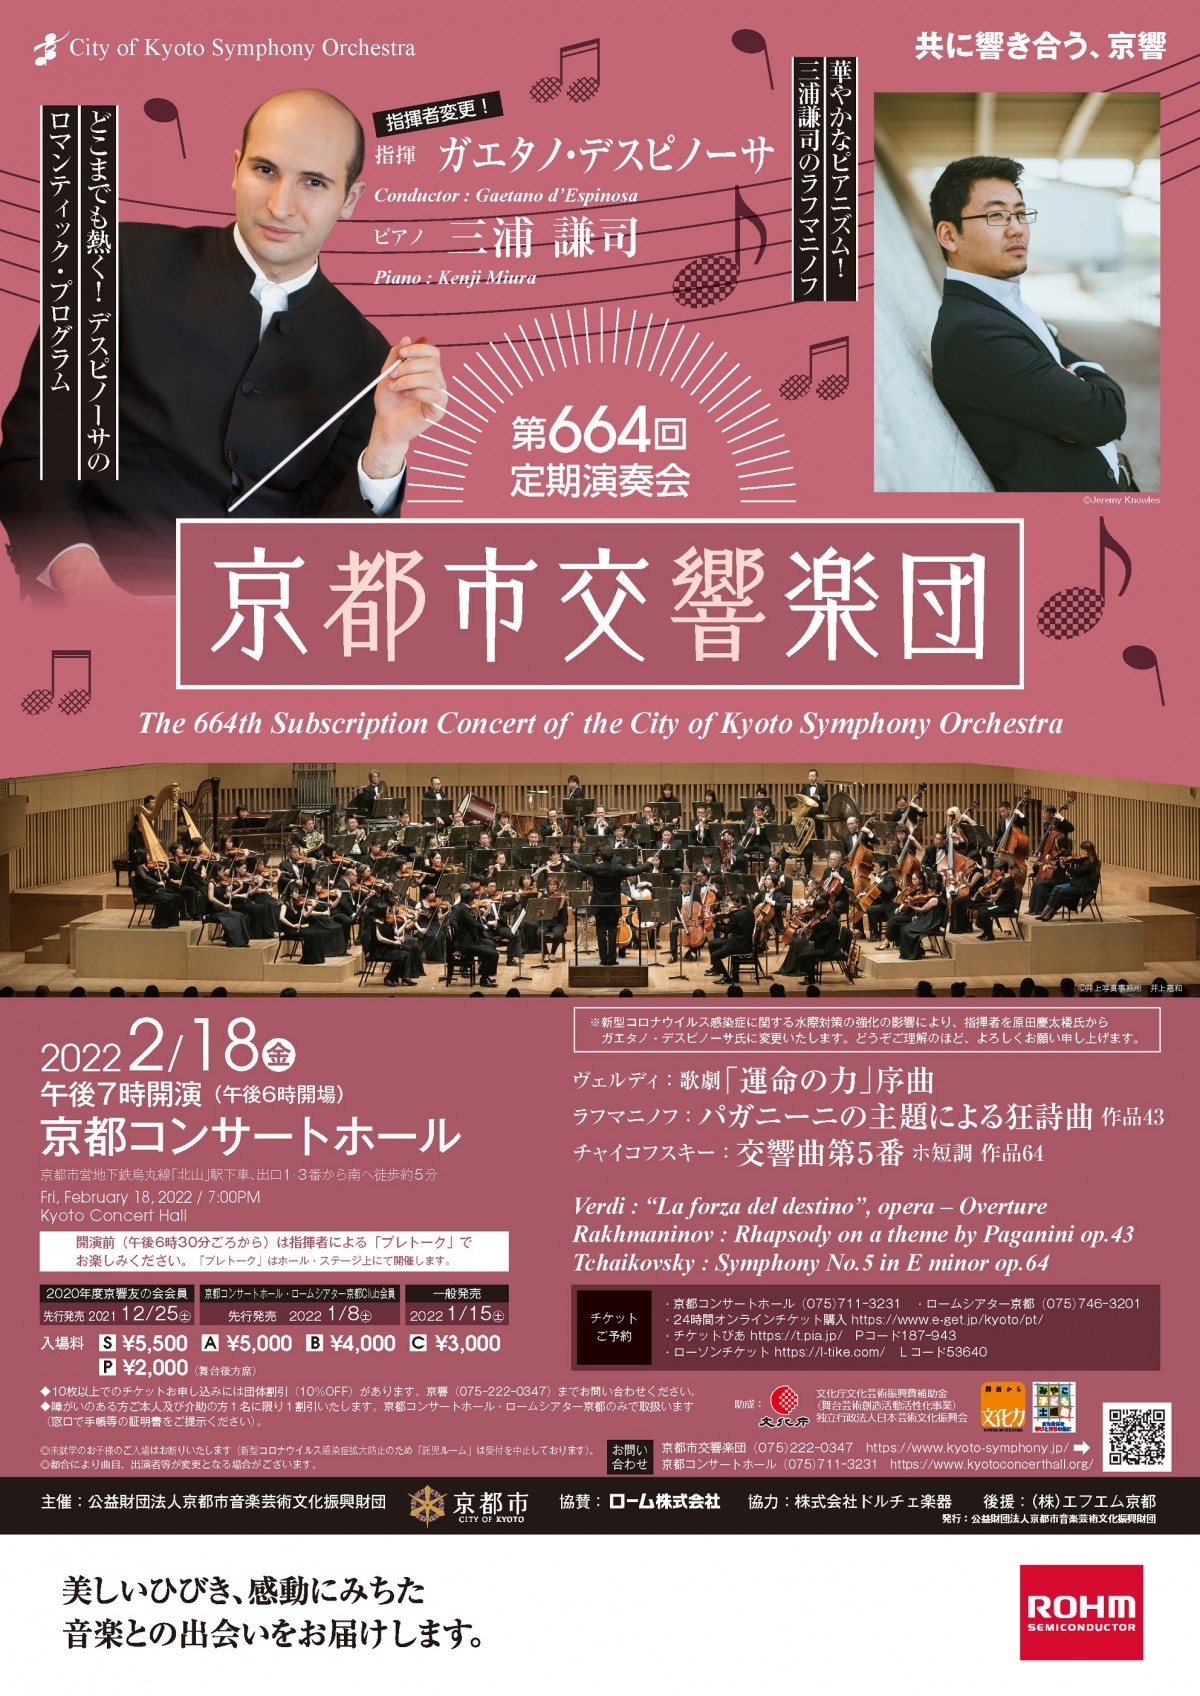 ＜Soloist Changed＞
The 664th Subscription Concert
